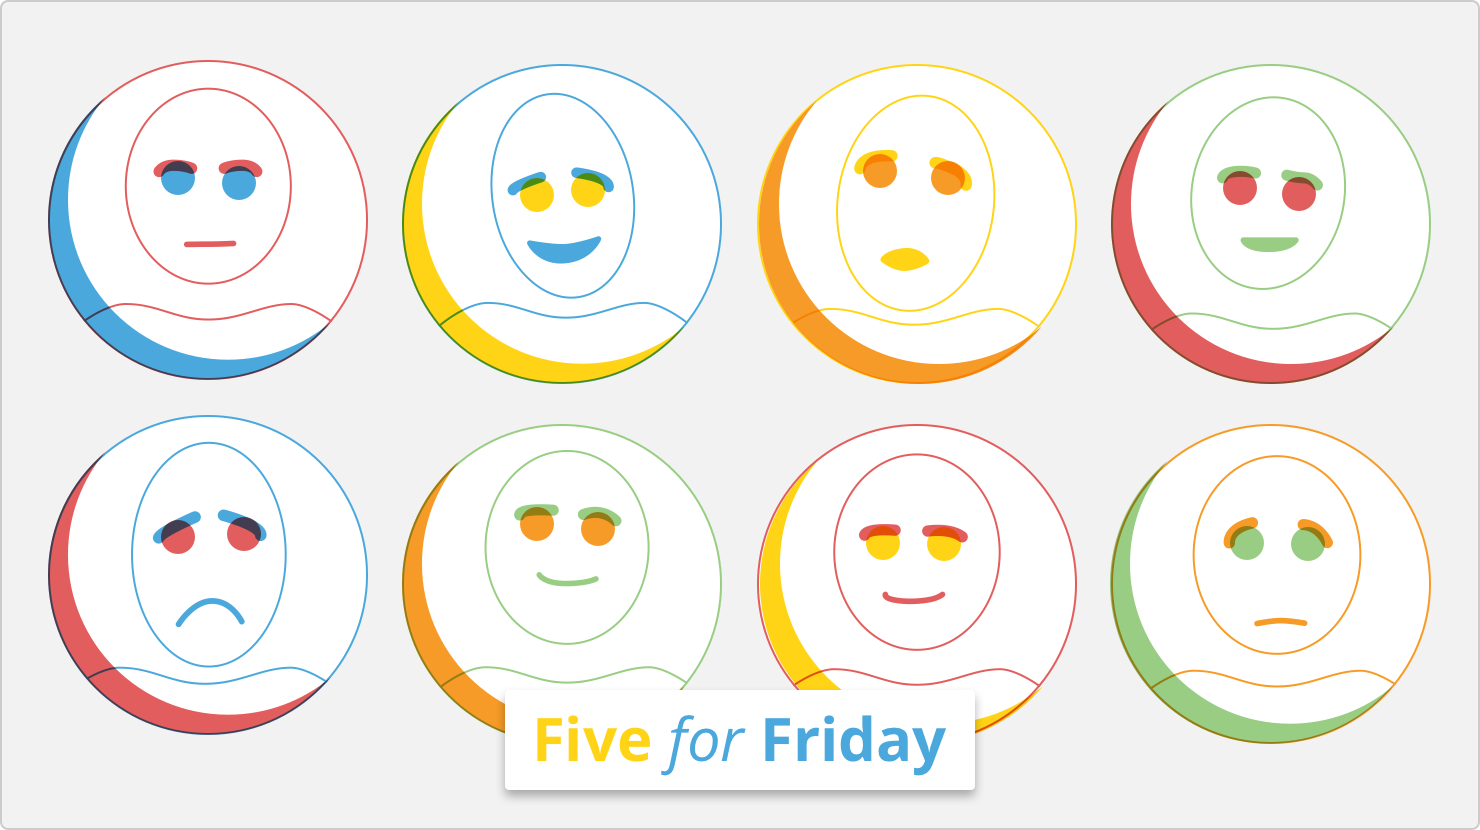 Five for Friday: Introverts and extroverts